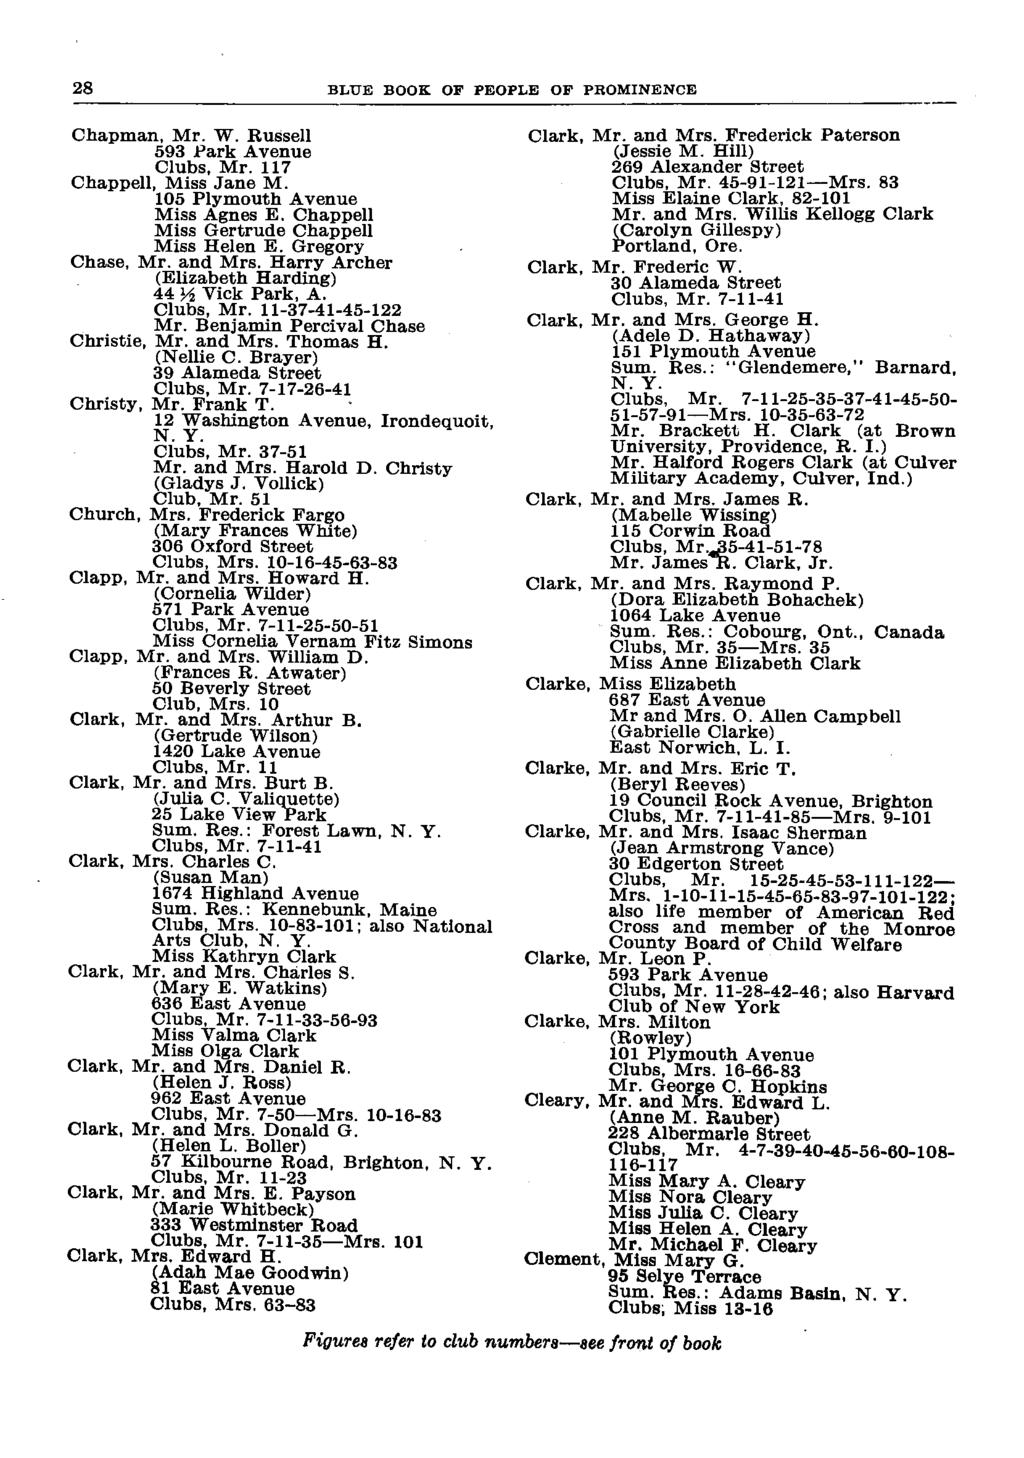 28 BLUE BOOK OF PEOPLE OF PROMINENCE Chapman, Mr. W. Russell Clark, Mr. and Mrs. Frederick Paterson 593 Park Avenue (Jessie M. Hill) Clubs, Mr. 117 269 Alexander Street Chappell, Miss Jane M.